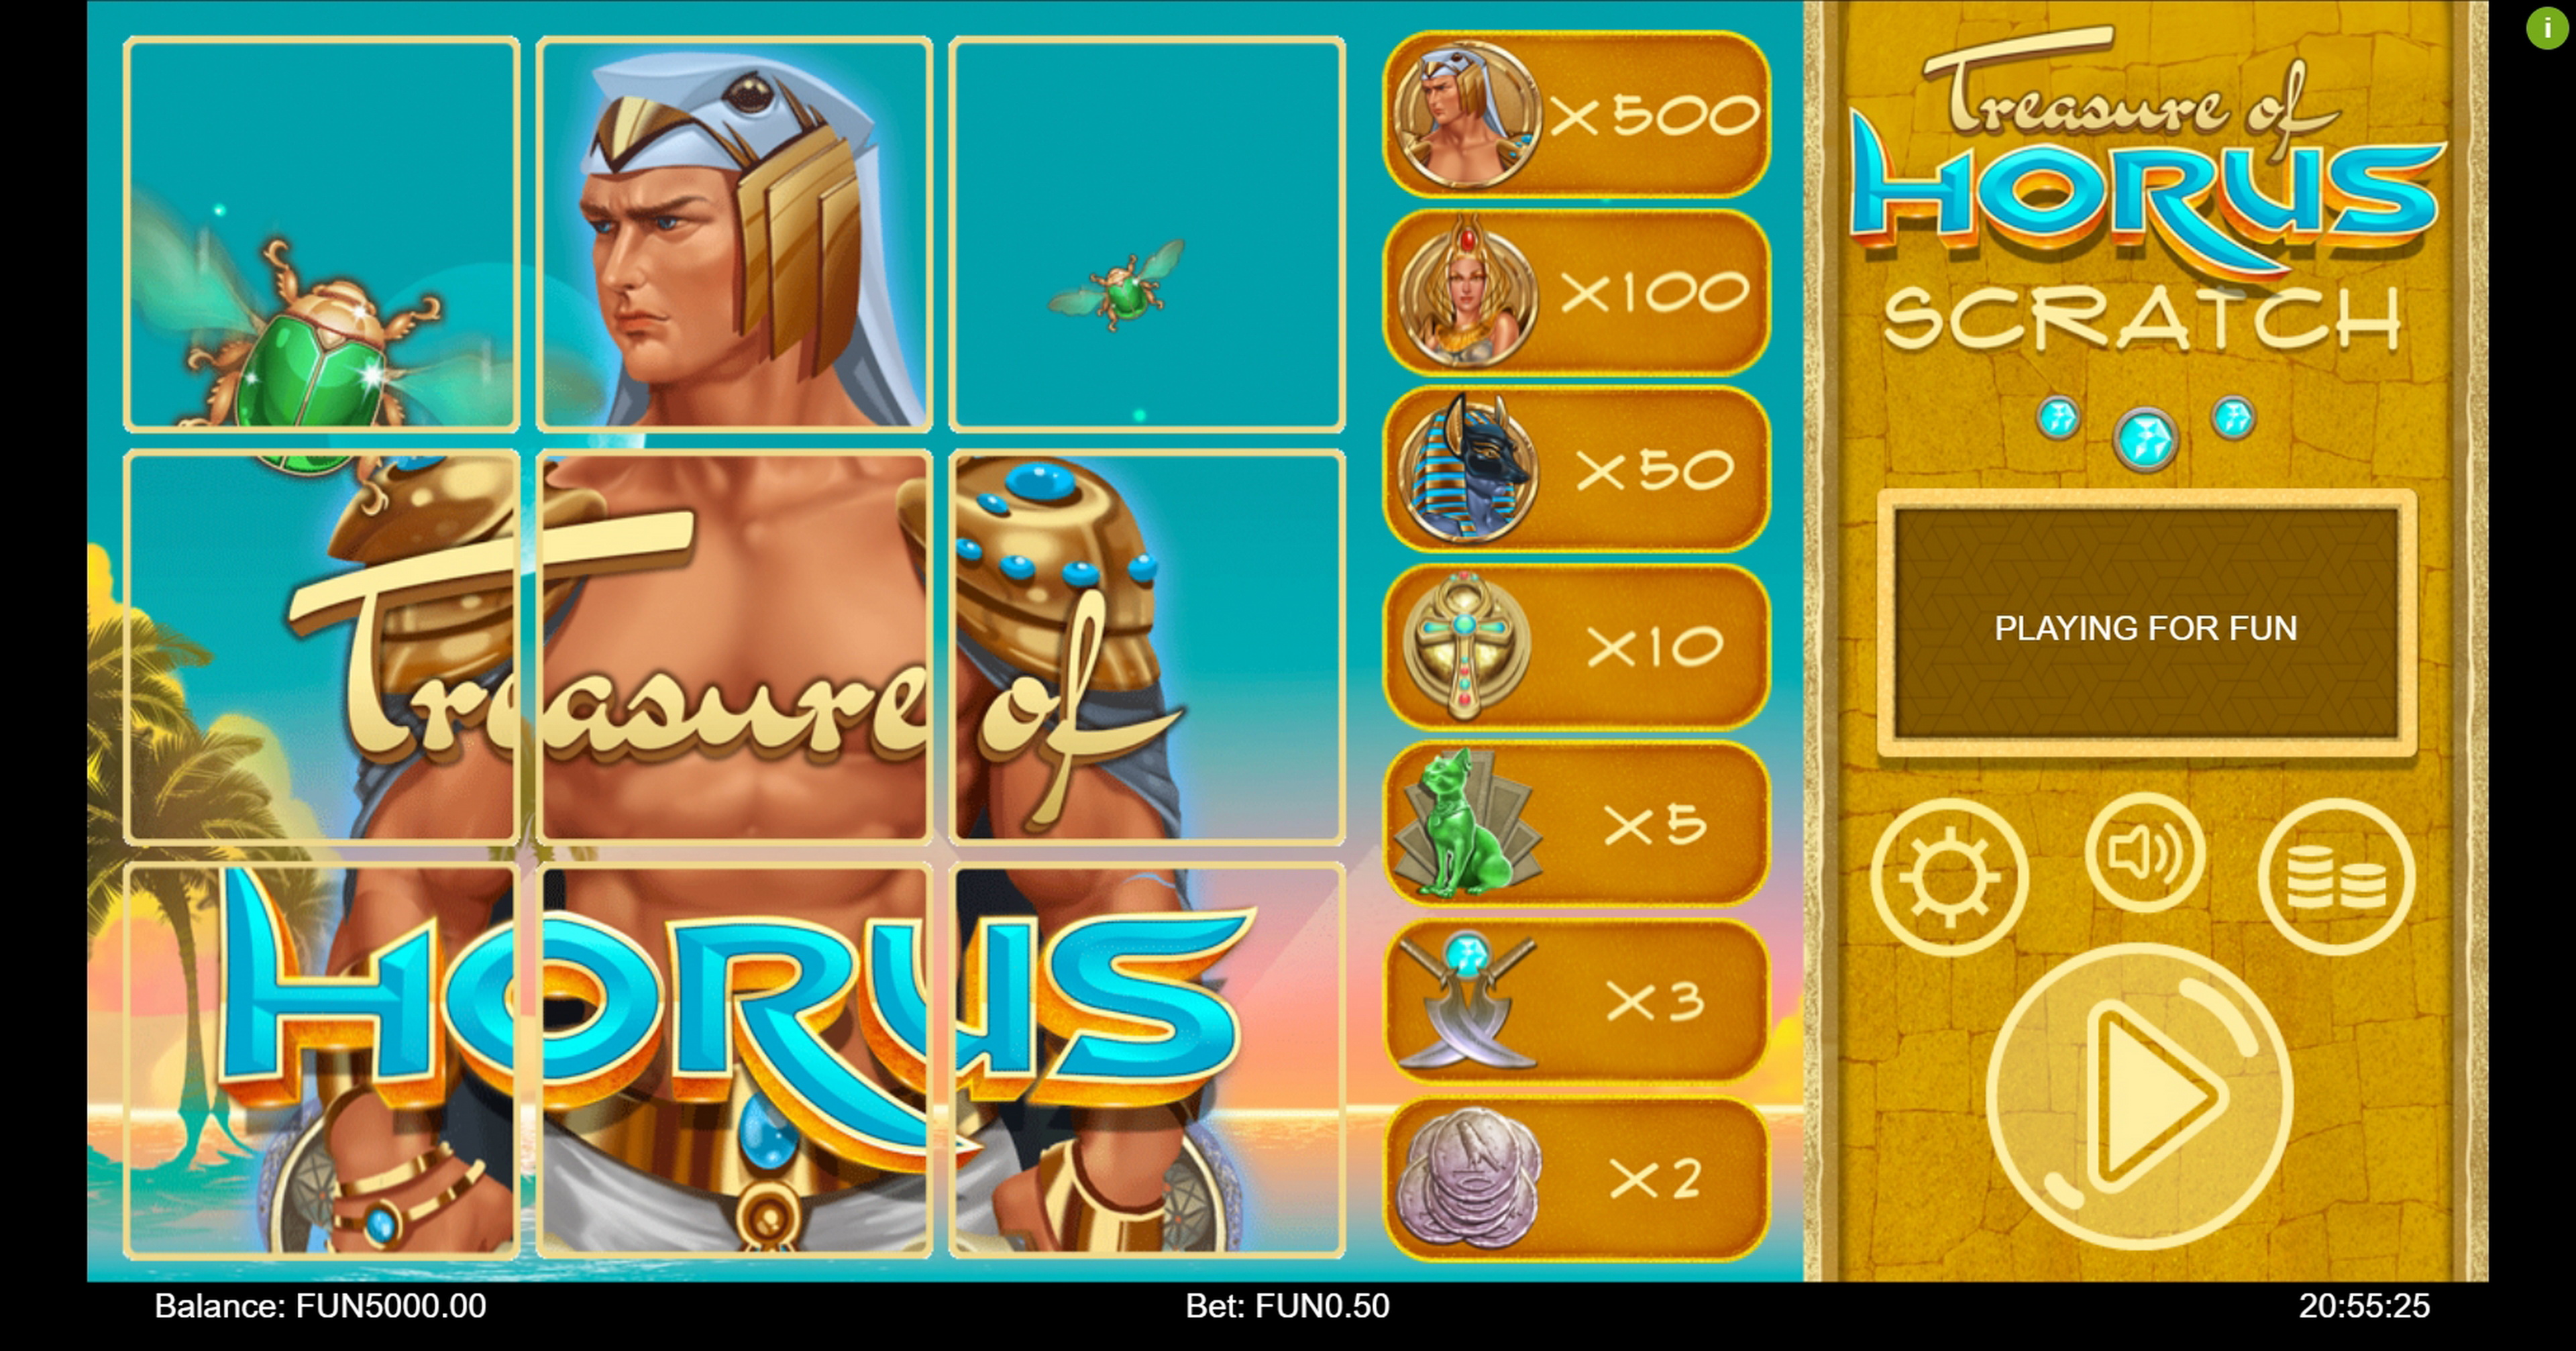 Reels in Treasure of Horus Scratch Slot Game by Iron Dog Studios